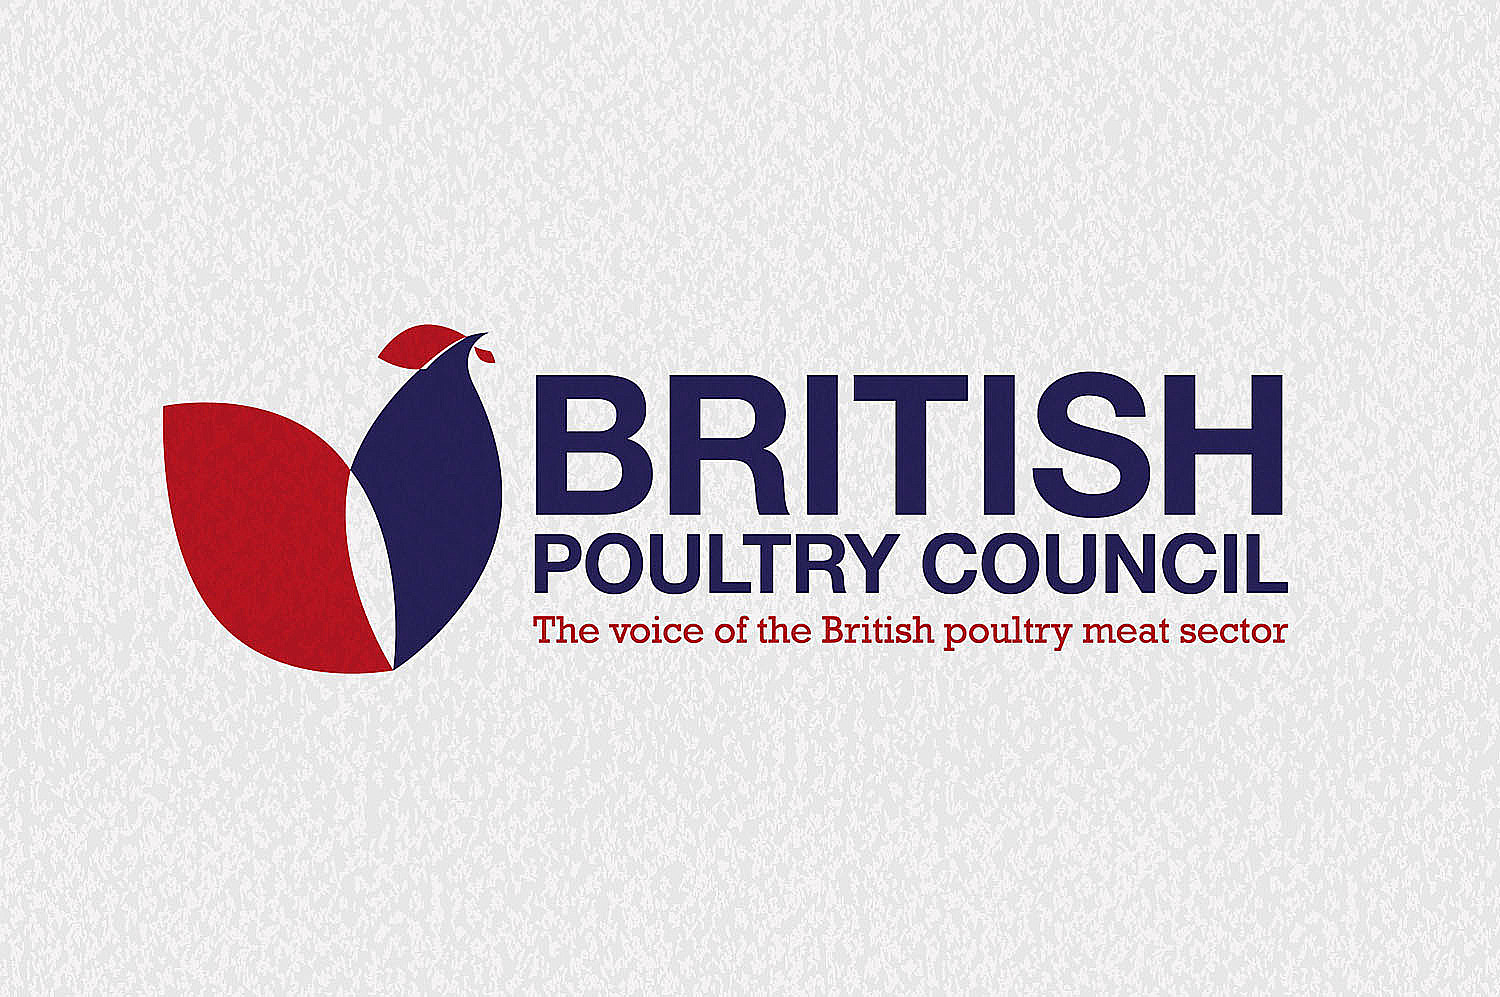 British Poultry Council branding